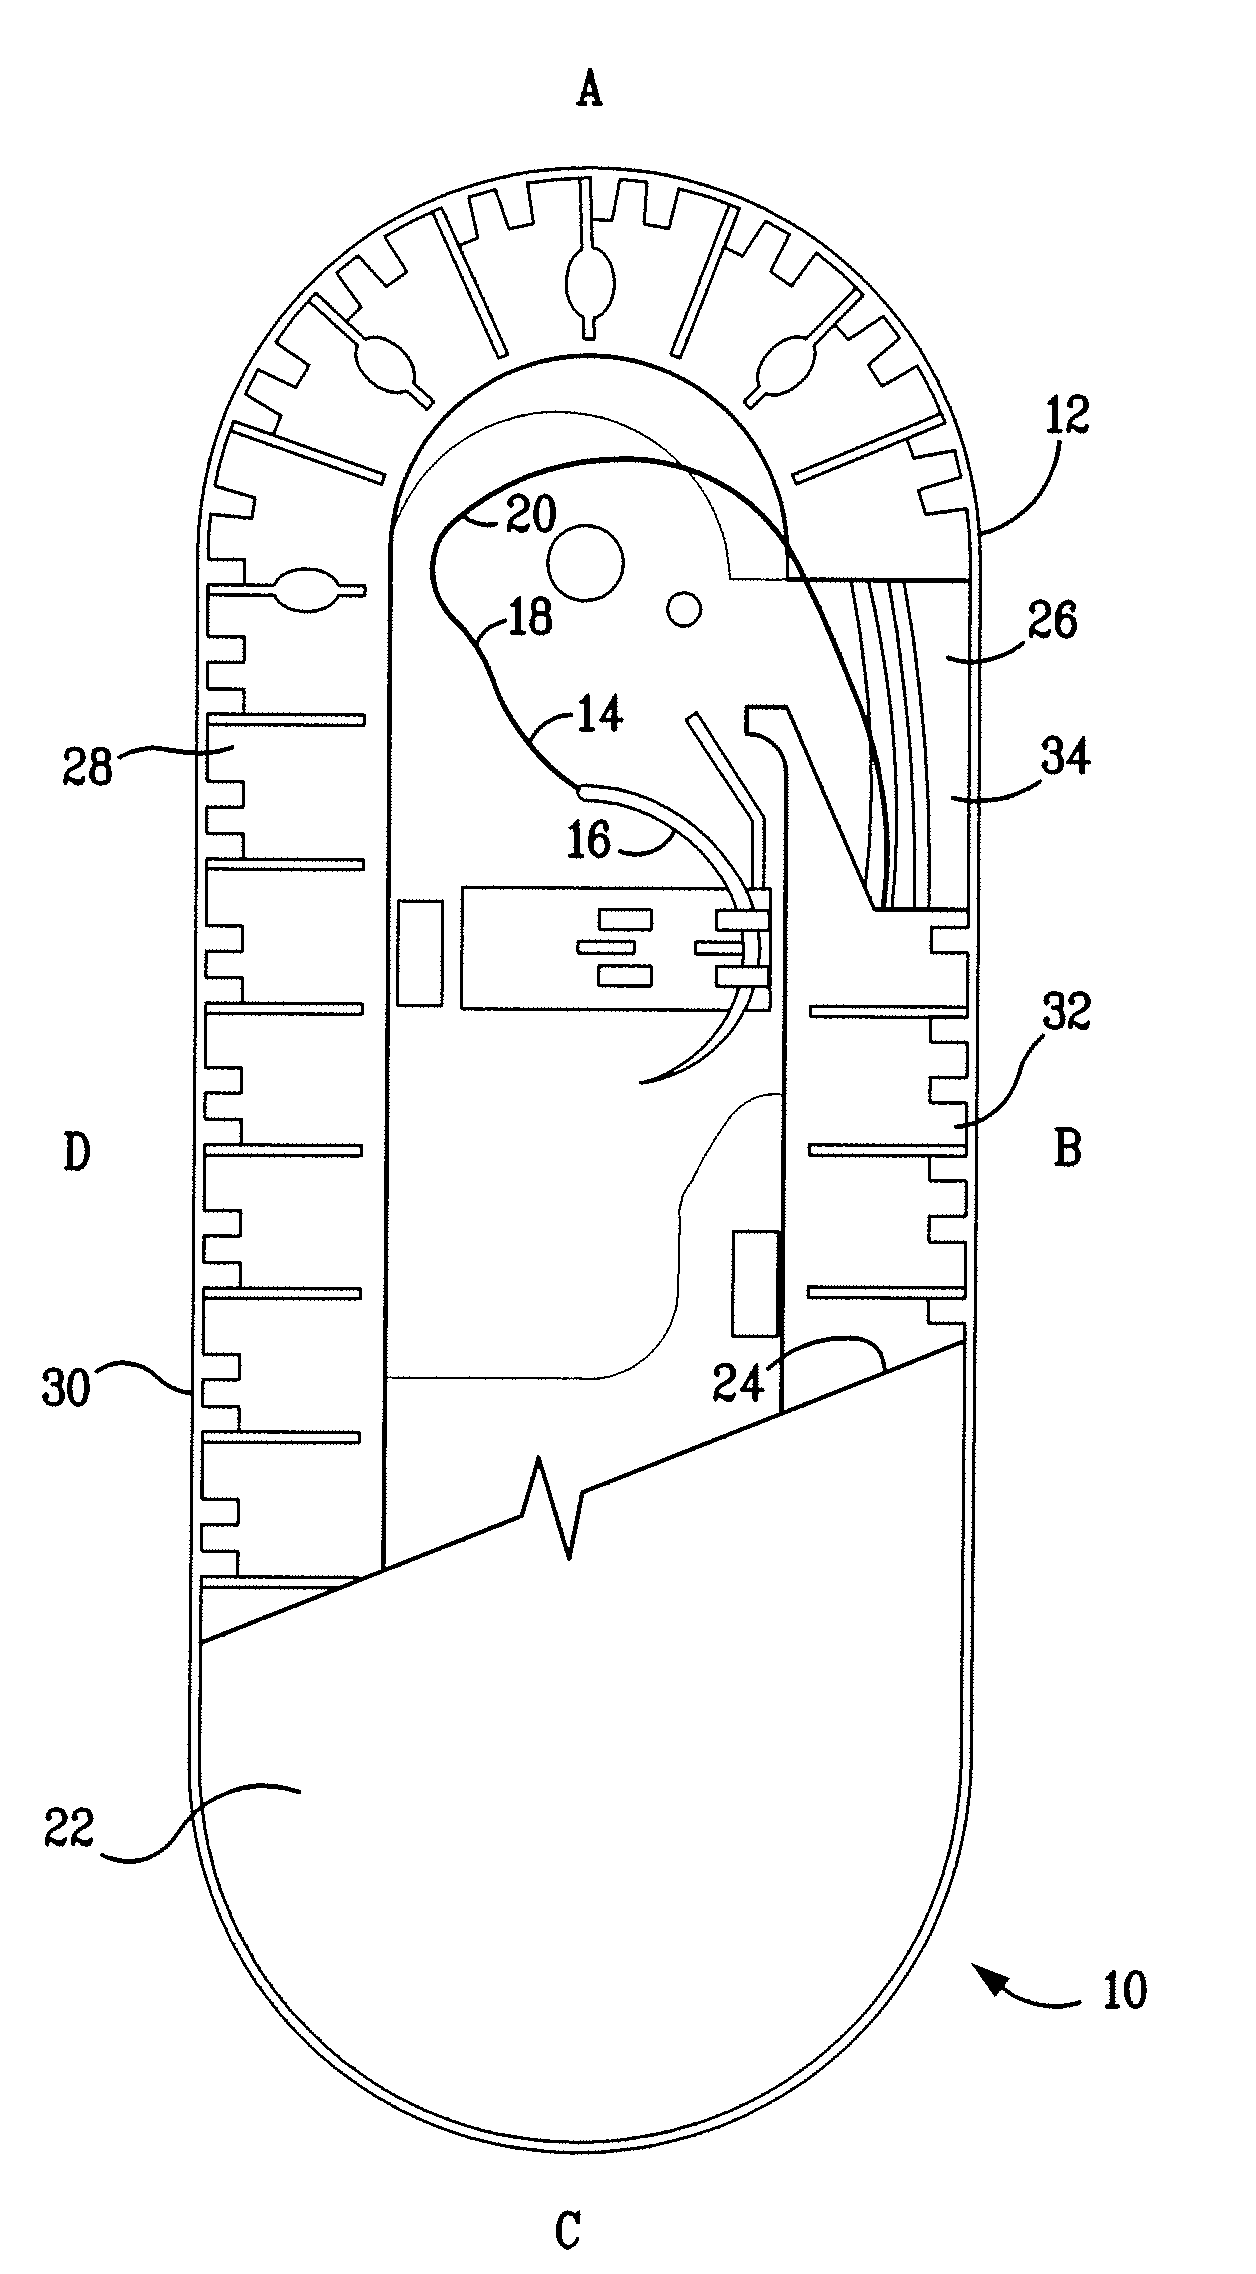 Packaged antimicrobial medical device and method of preparing same